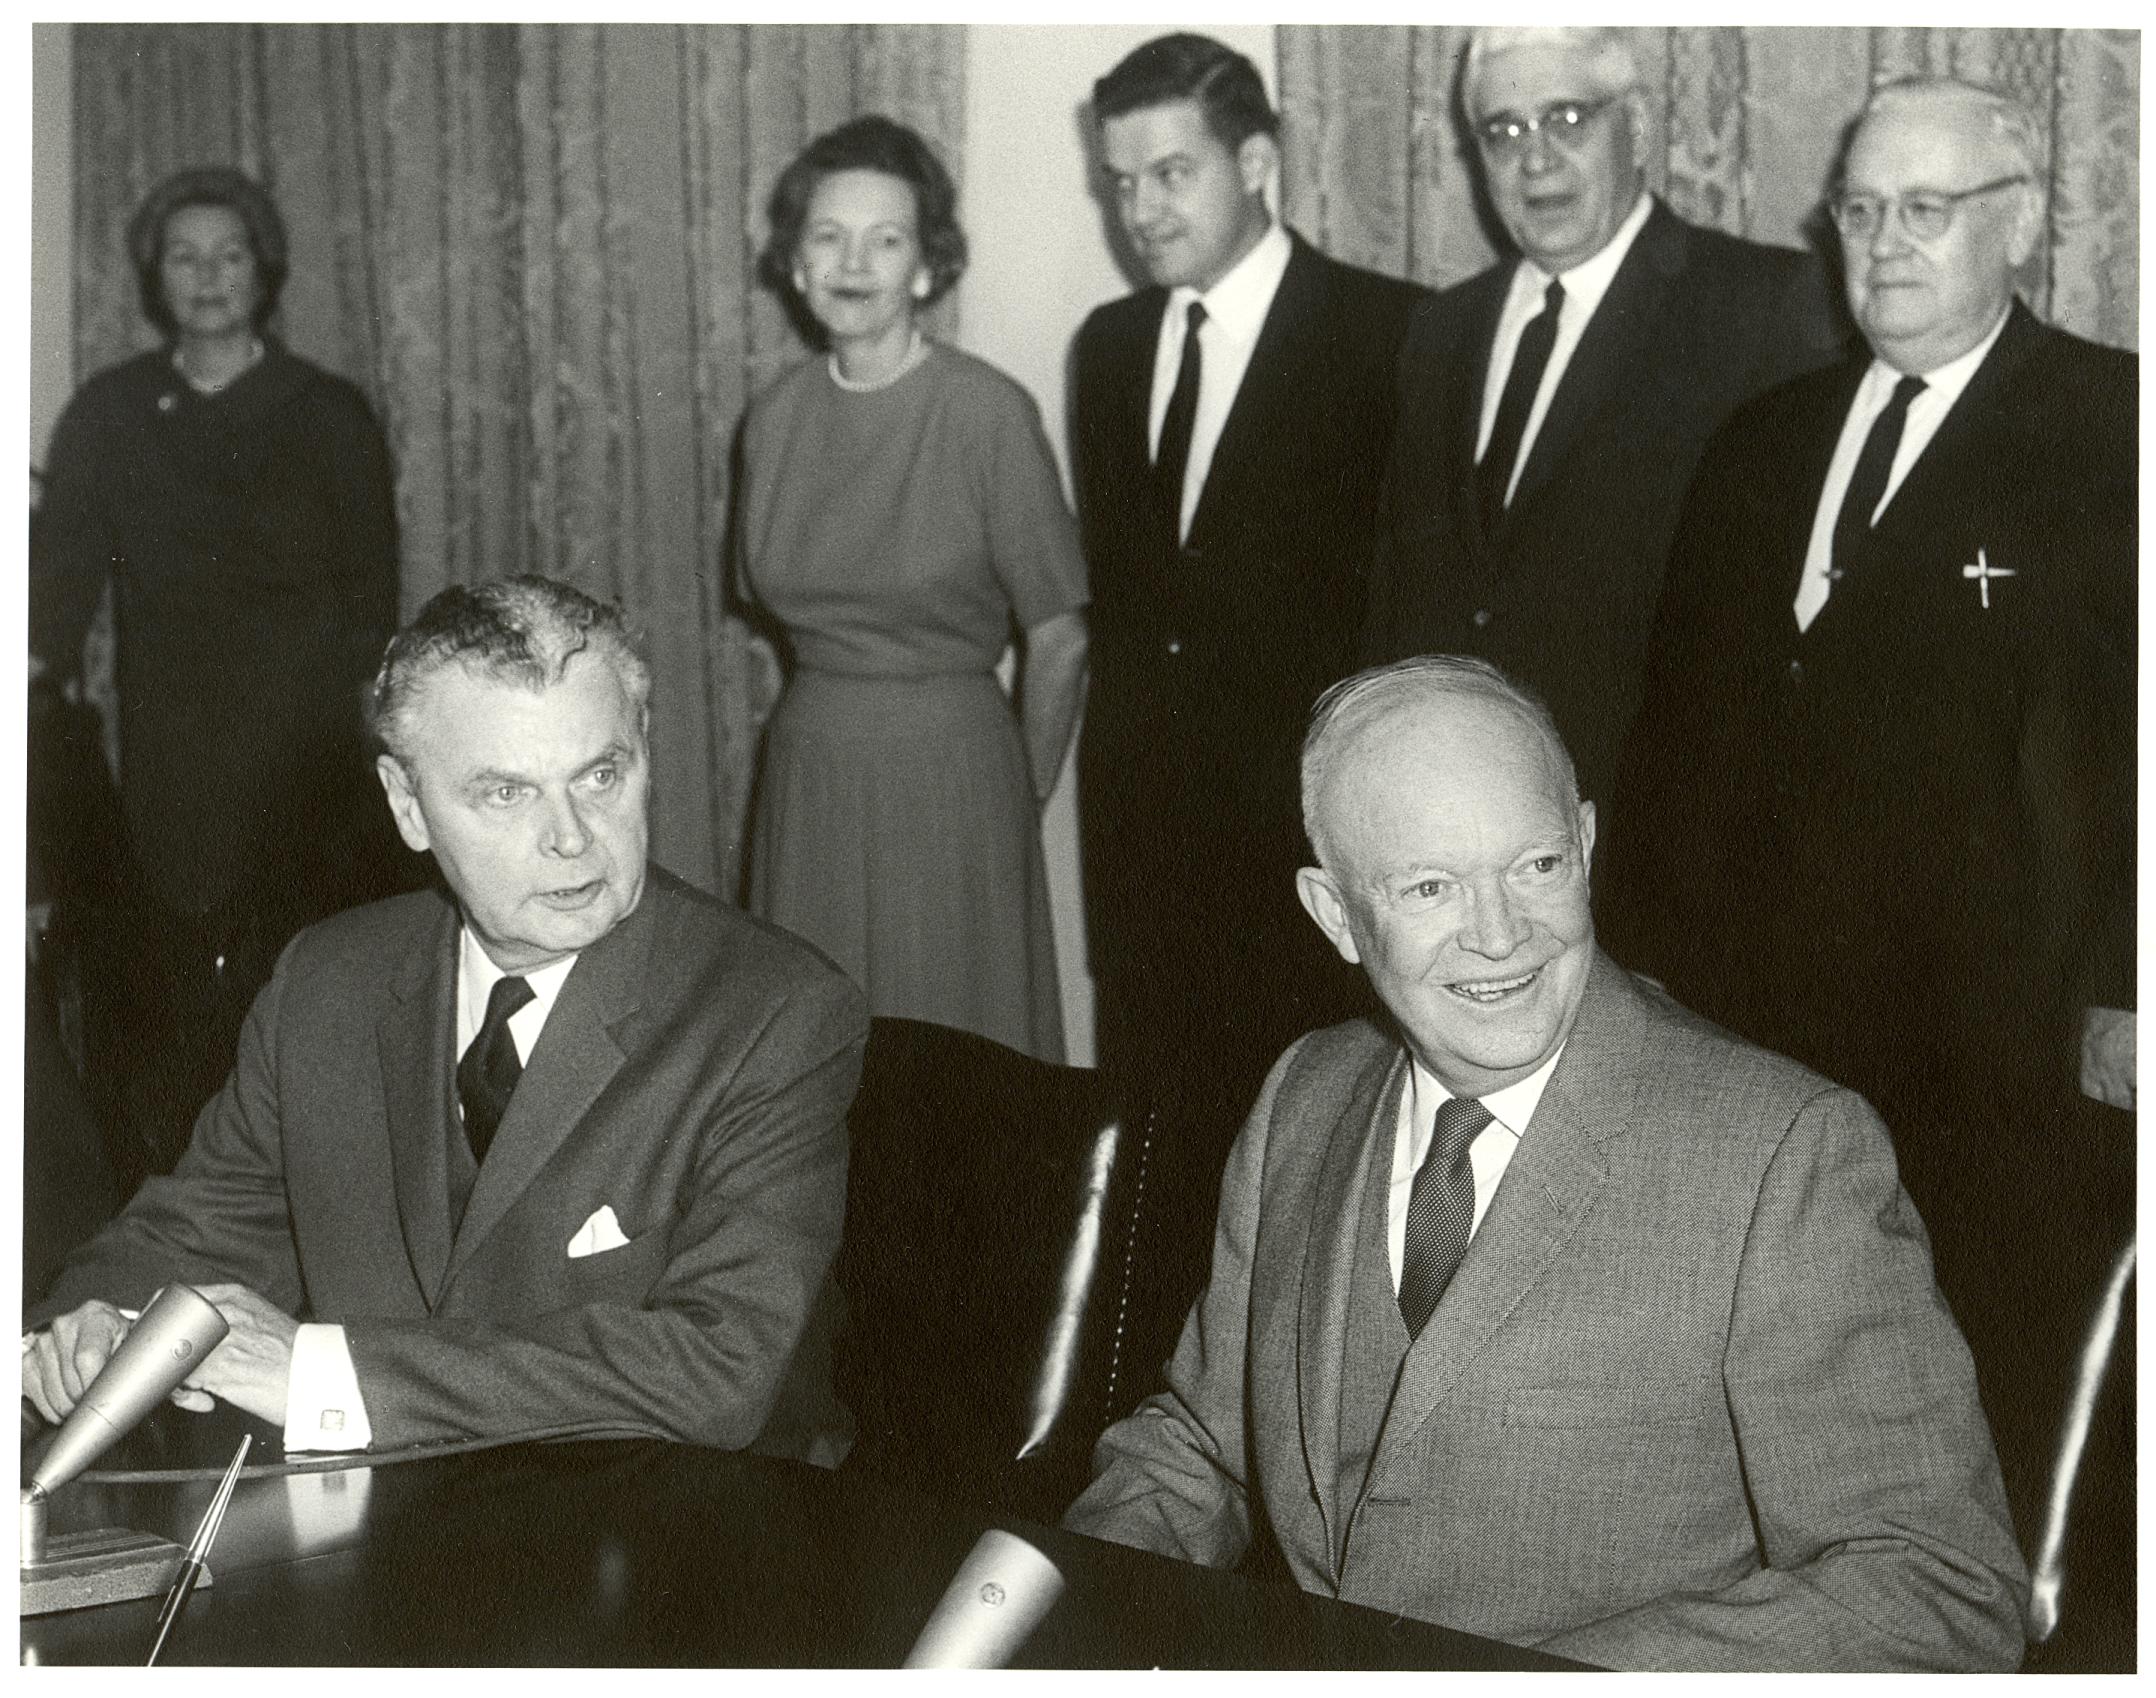 John_Diefenbaker_and_Dwight_Eisenhower_at_signing_of_Columbia_River_Treaty_(January_1961)